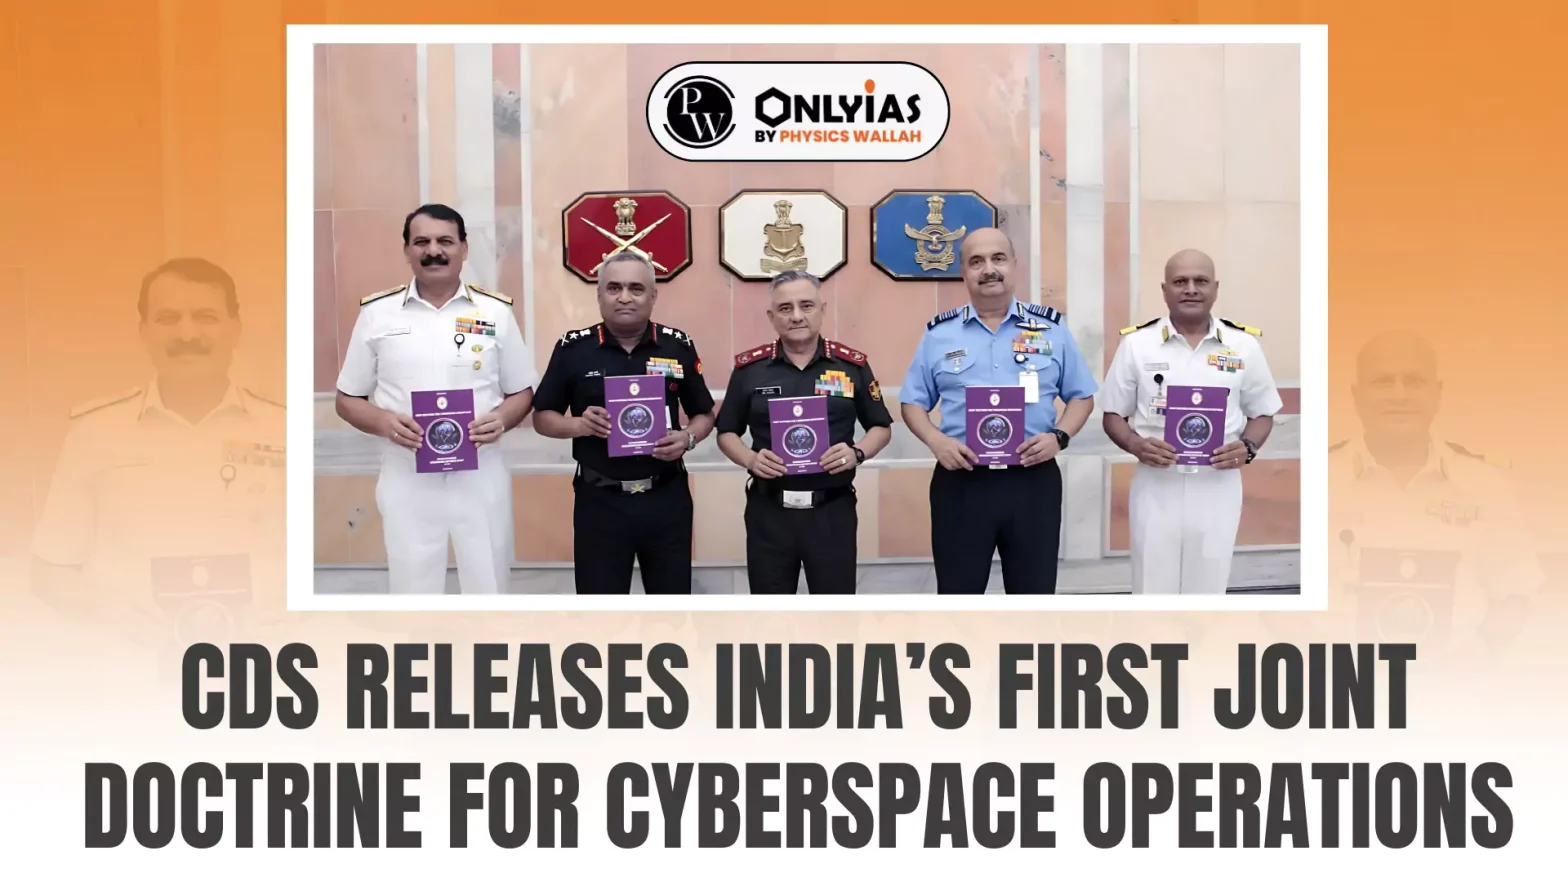 CDS Releases India’s First Joint Doctrine For Cyberspace Operations